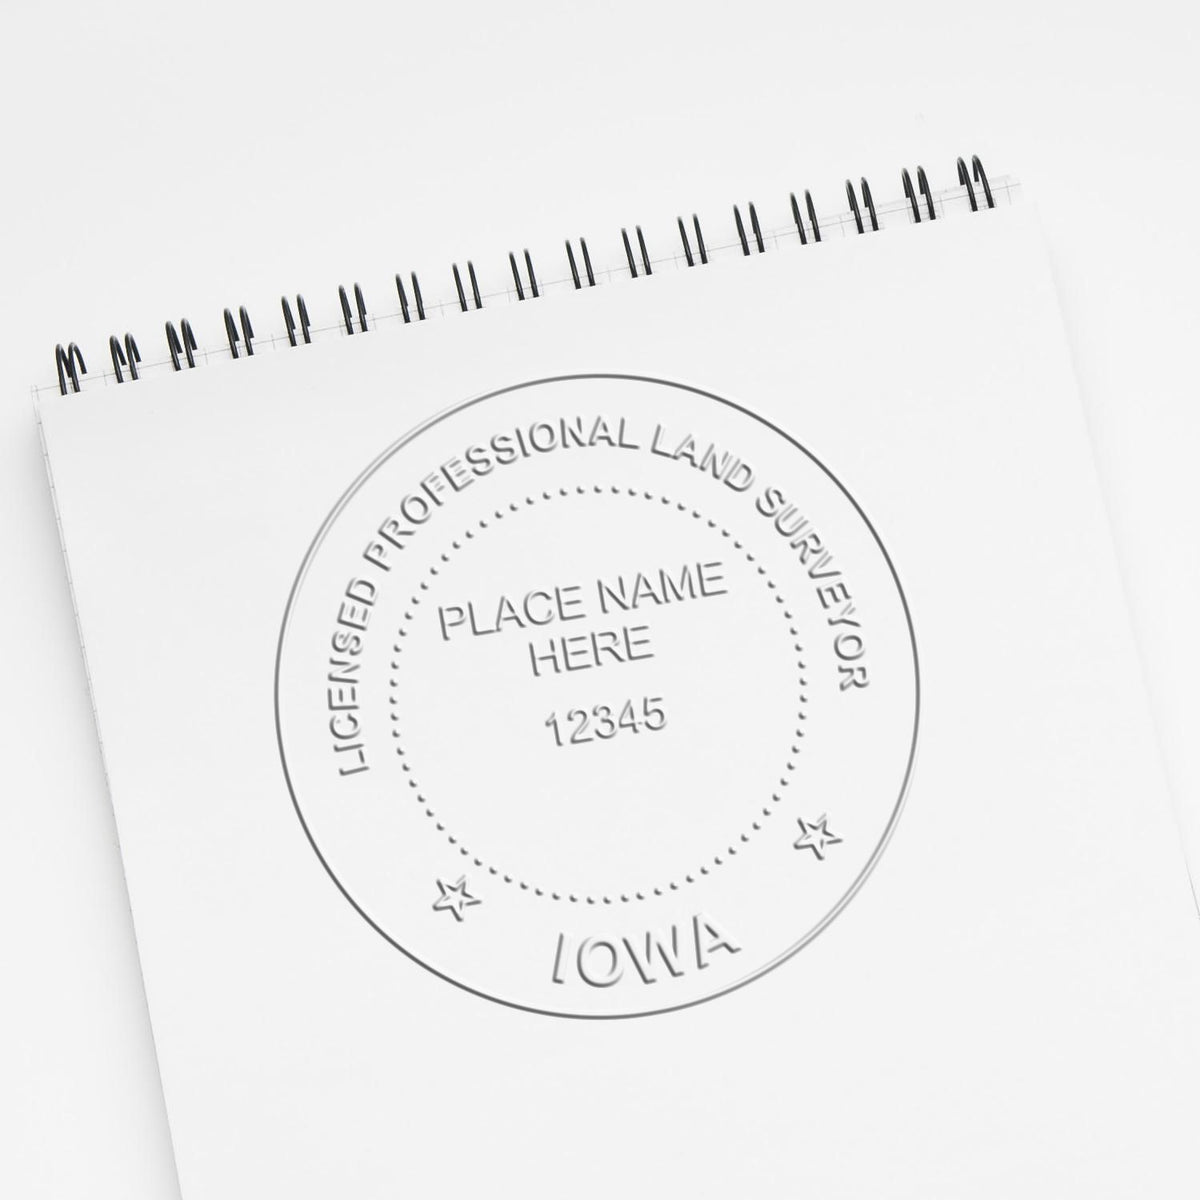 An alternative view of the Handheld Iowa Land Surveyor Seal stamped on a sheet of paper showing the image in use